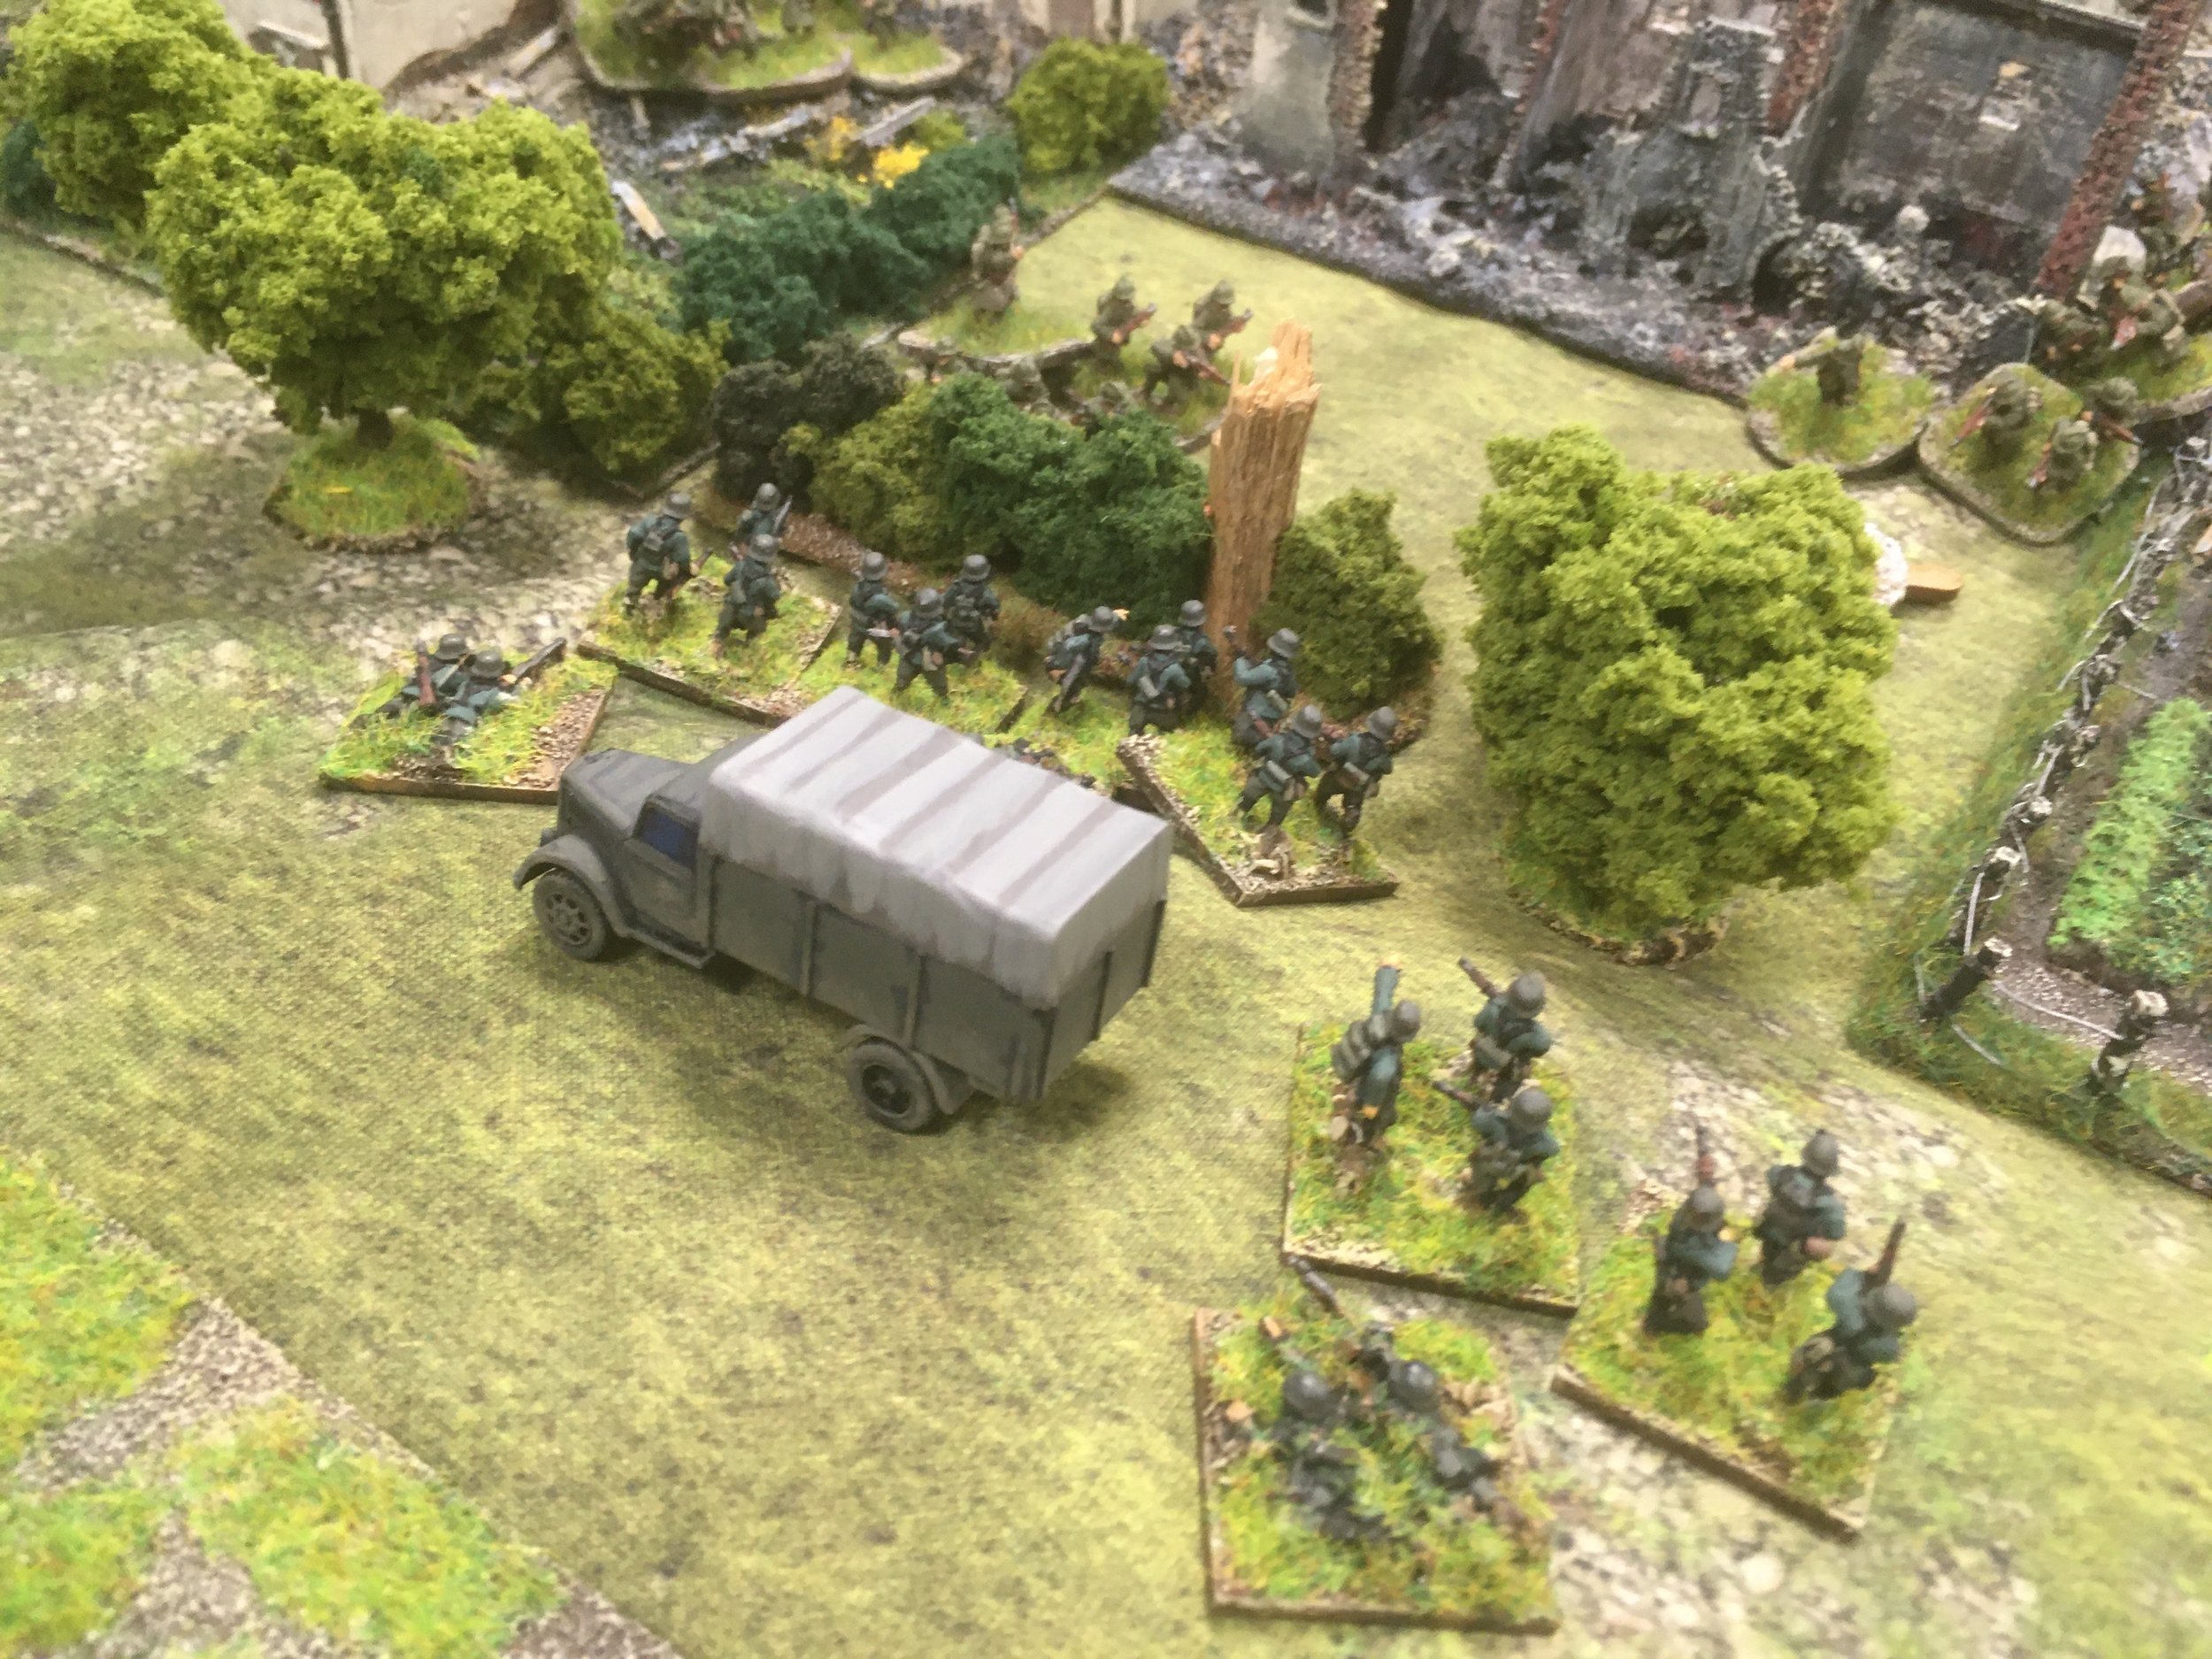 A second platoon embracing the spirit of Blitzkrieg rushes forward and disembarks to take on the survivors of the Panzer IV fire...